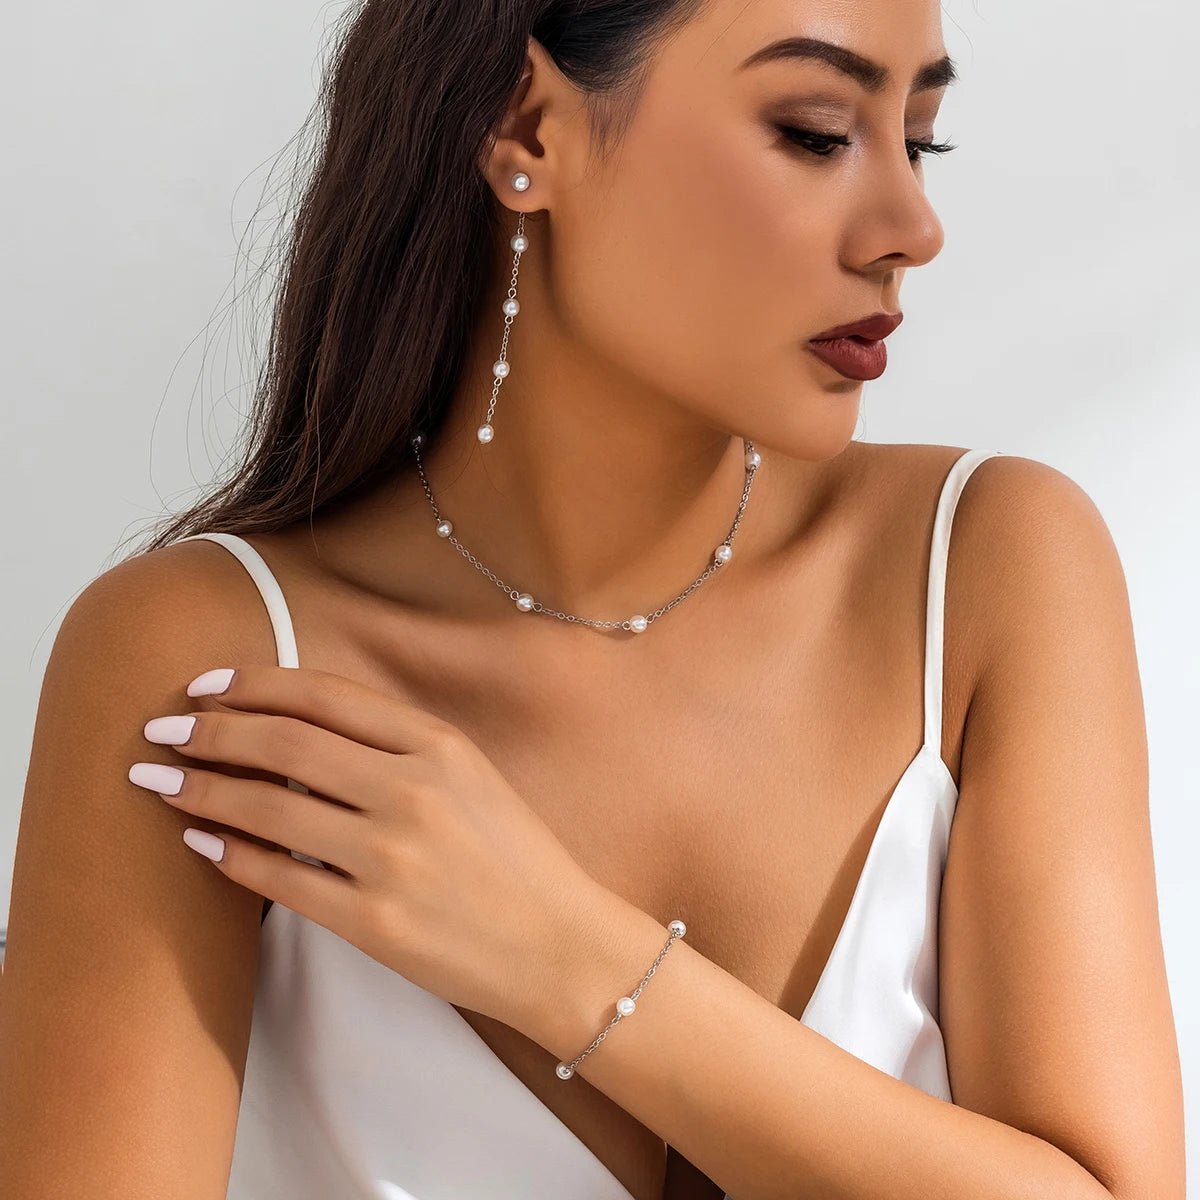 Dainty Chain Pearl Bracelet, Necklace, and Earring Set - Veinci